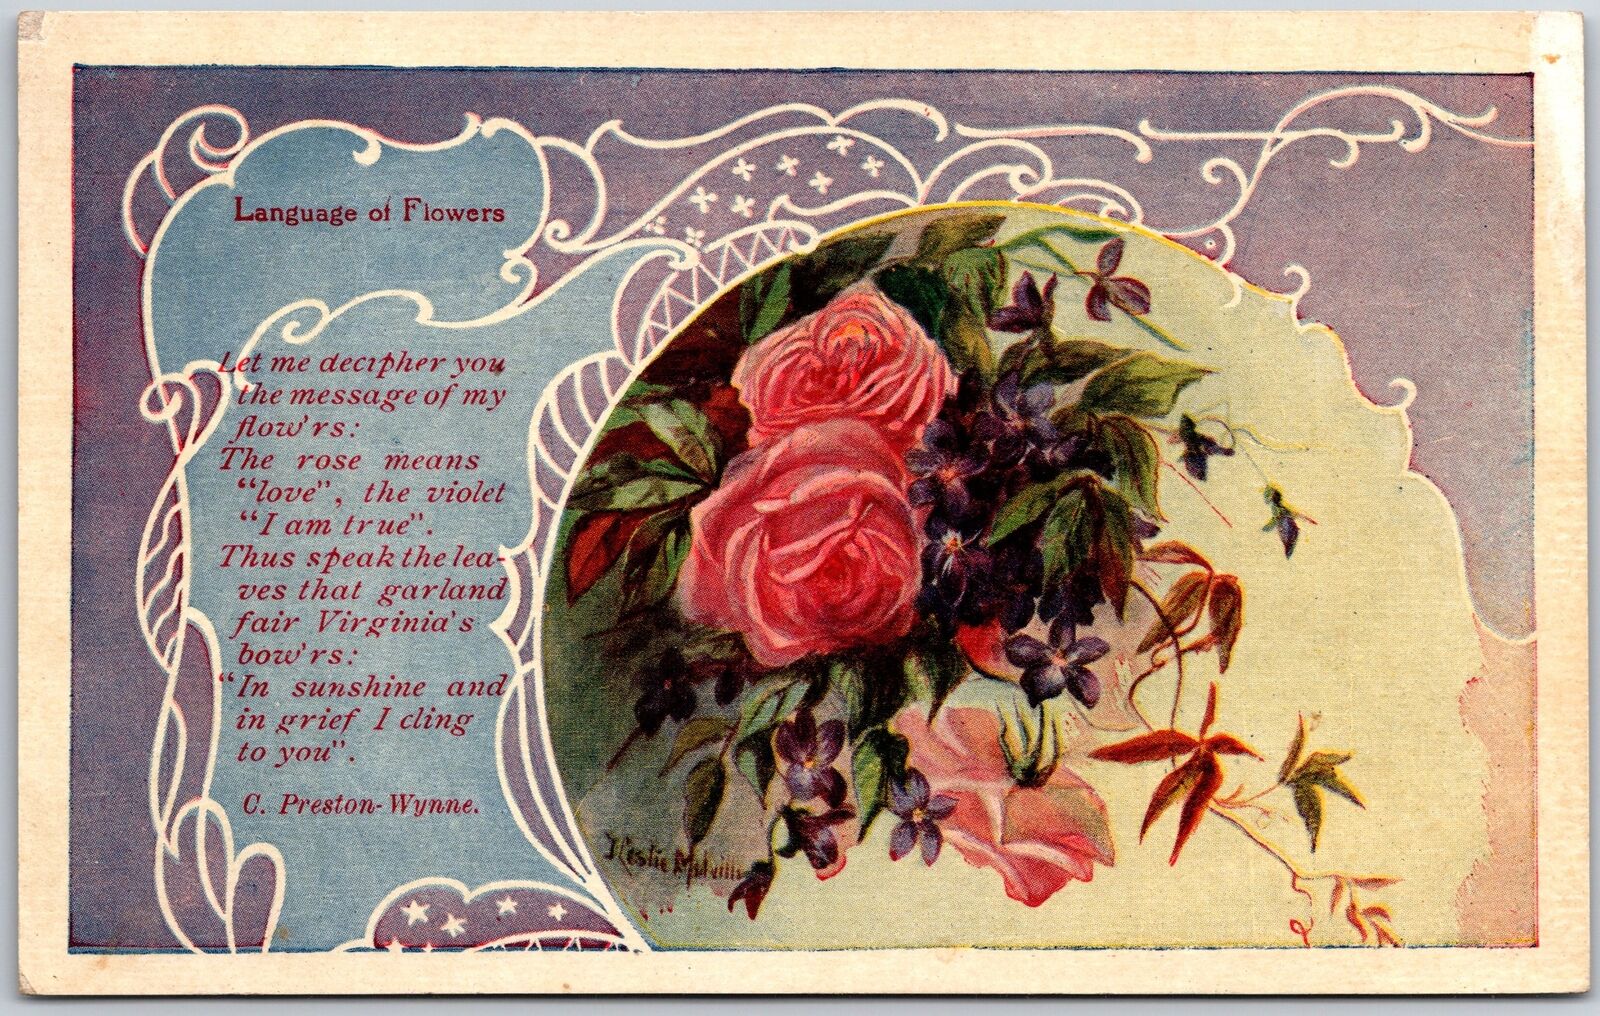 1909 Language of Flowers Bouquet Poem Greetings Wishes Card Posted Postcard